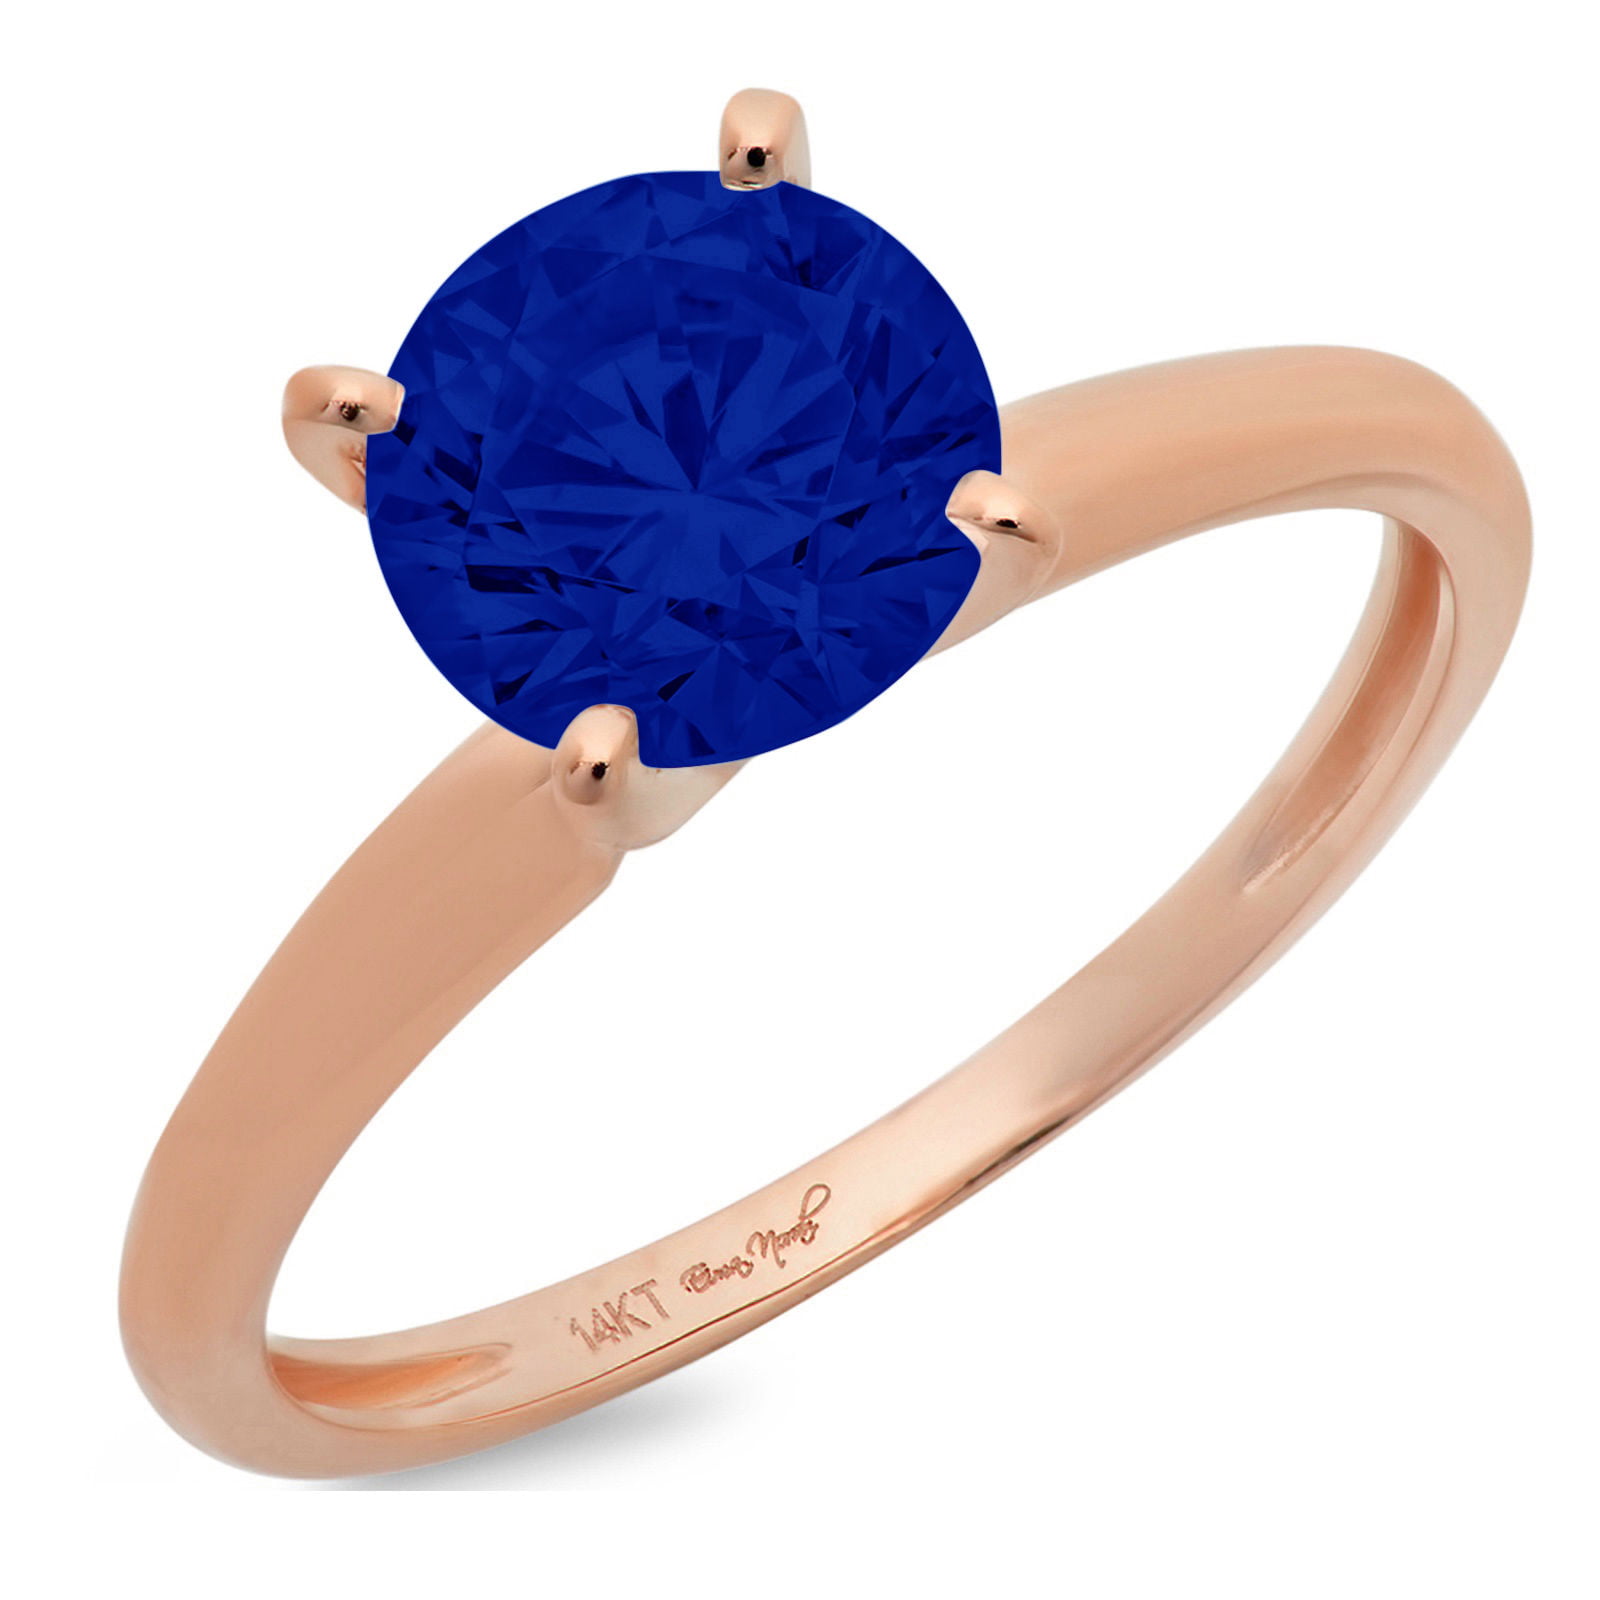 1.50 ct Round Cut Simulated Blue Sapphire VVS1 Classic Wedding Engagement Bridal Promise Designer Ring Solid 14k Rose Gold